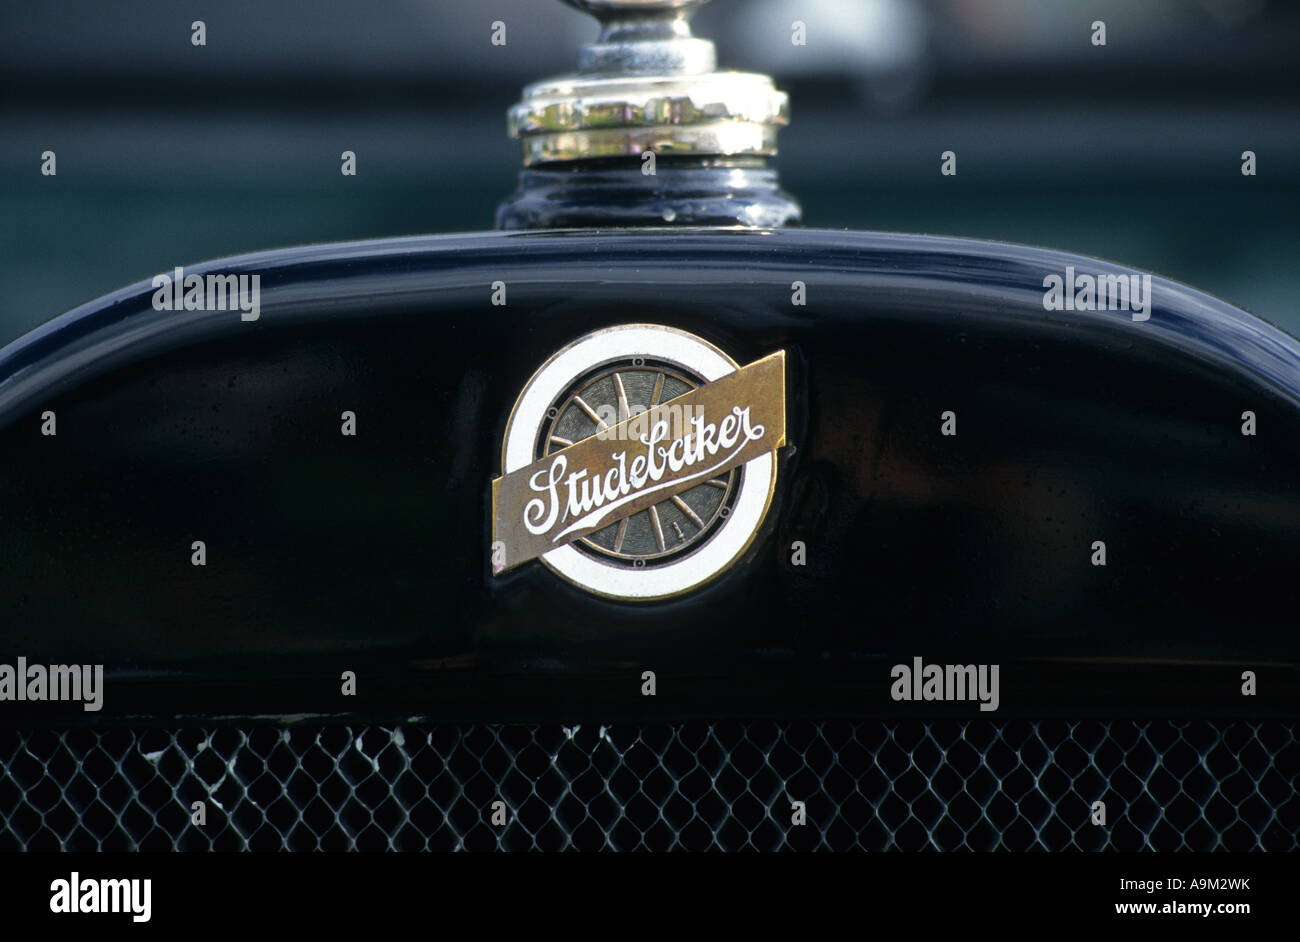 Studebaker of 1917. American car manufacturer 1902 to 1966. Studebaker car auto badge marque American maker Stock Photo